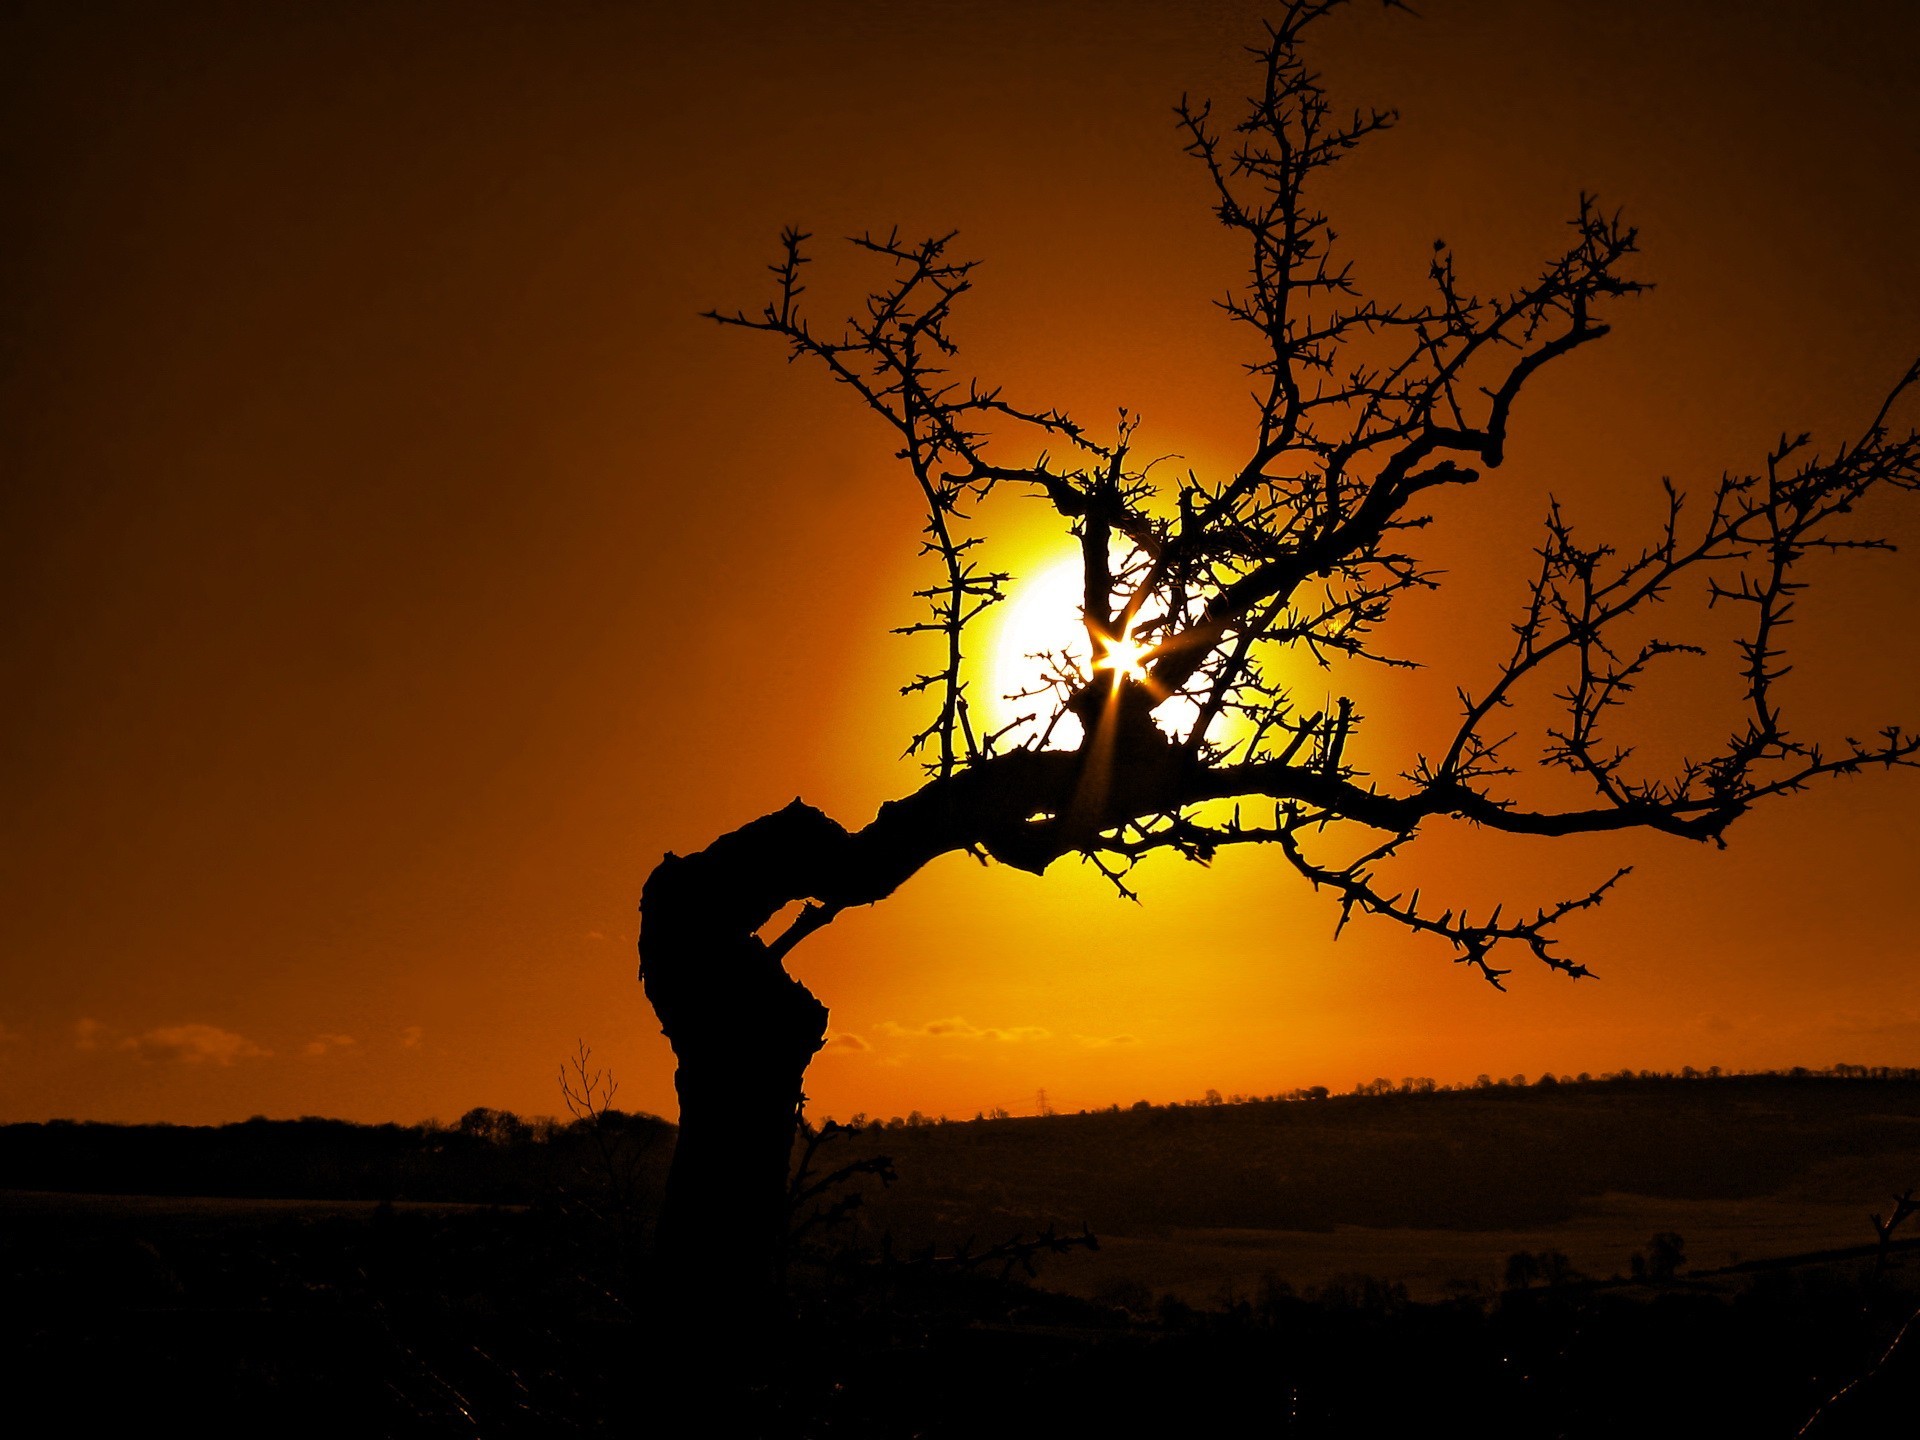 bended, Tree, And, Golden, Sun Wallpaper